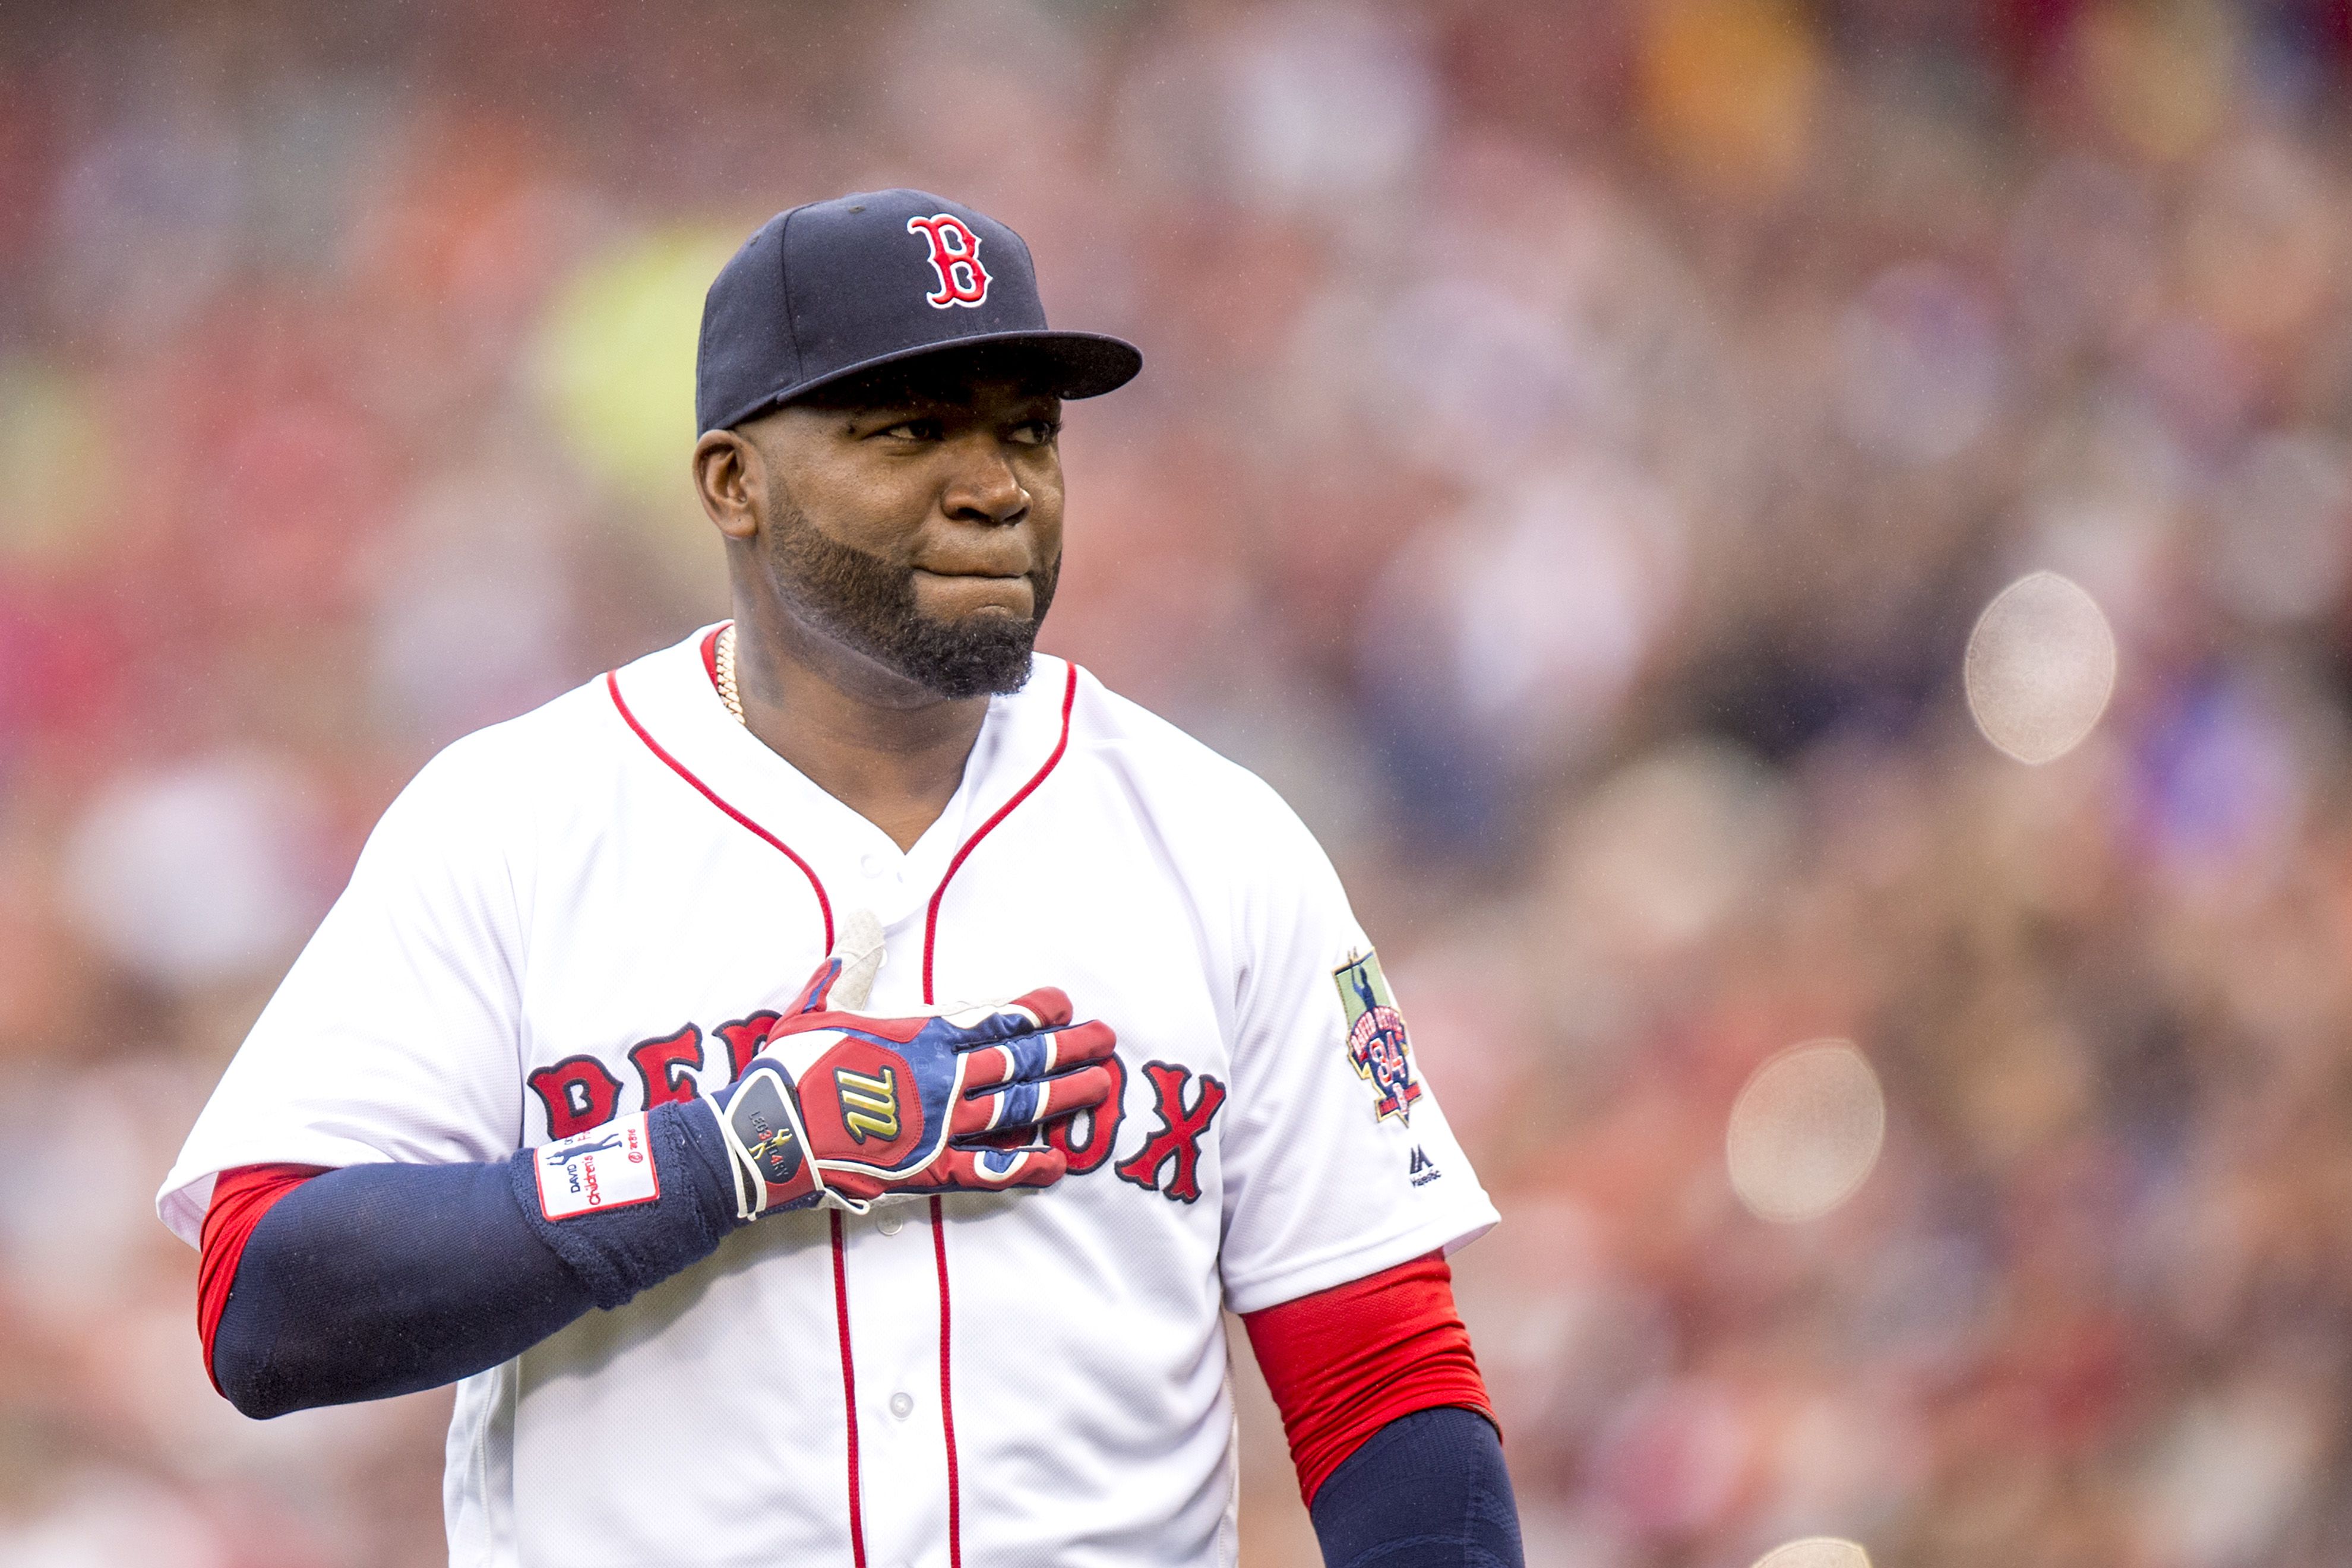 David Ortiz thanks family, former teammates and fans, as No. 34 is retired